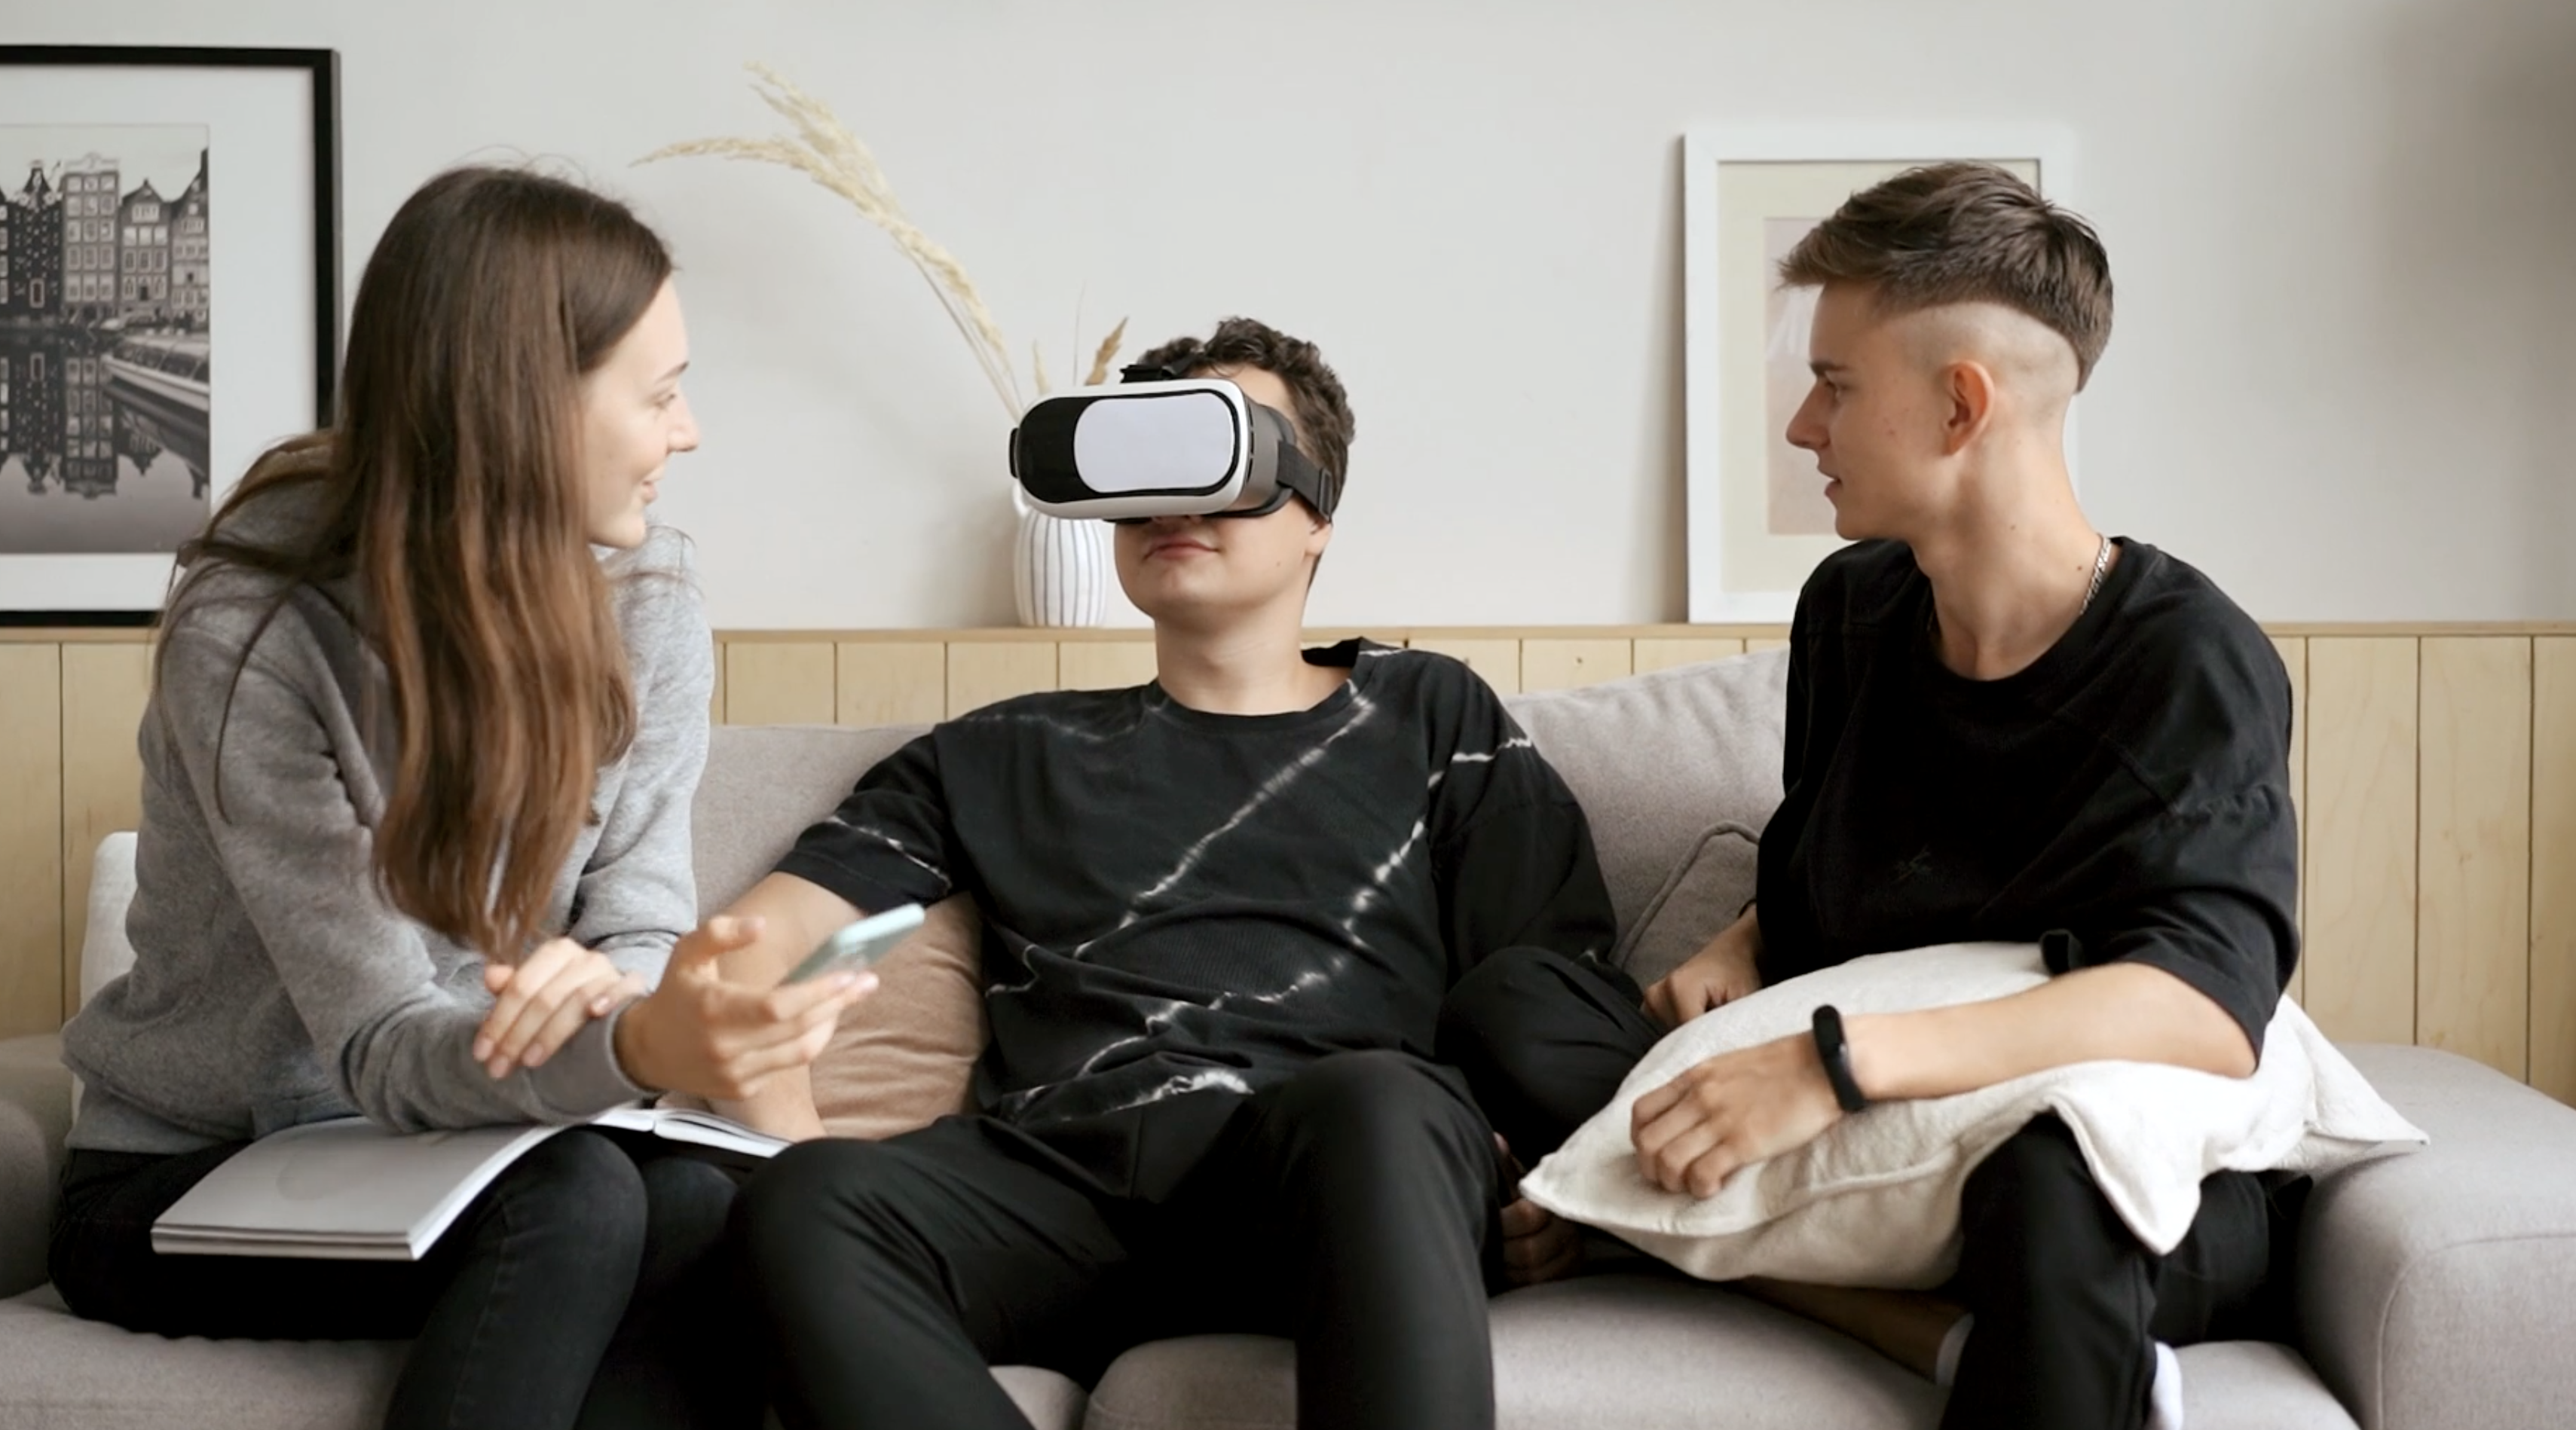 group of 3 young adults one wearing a VR headset